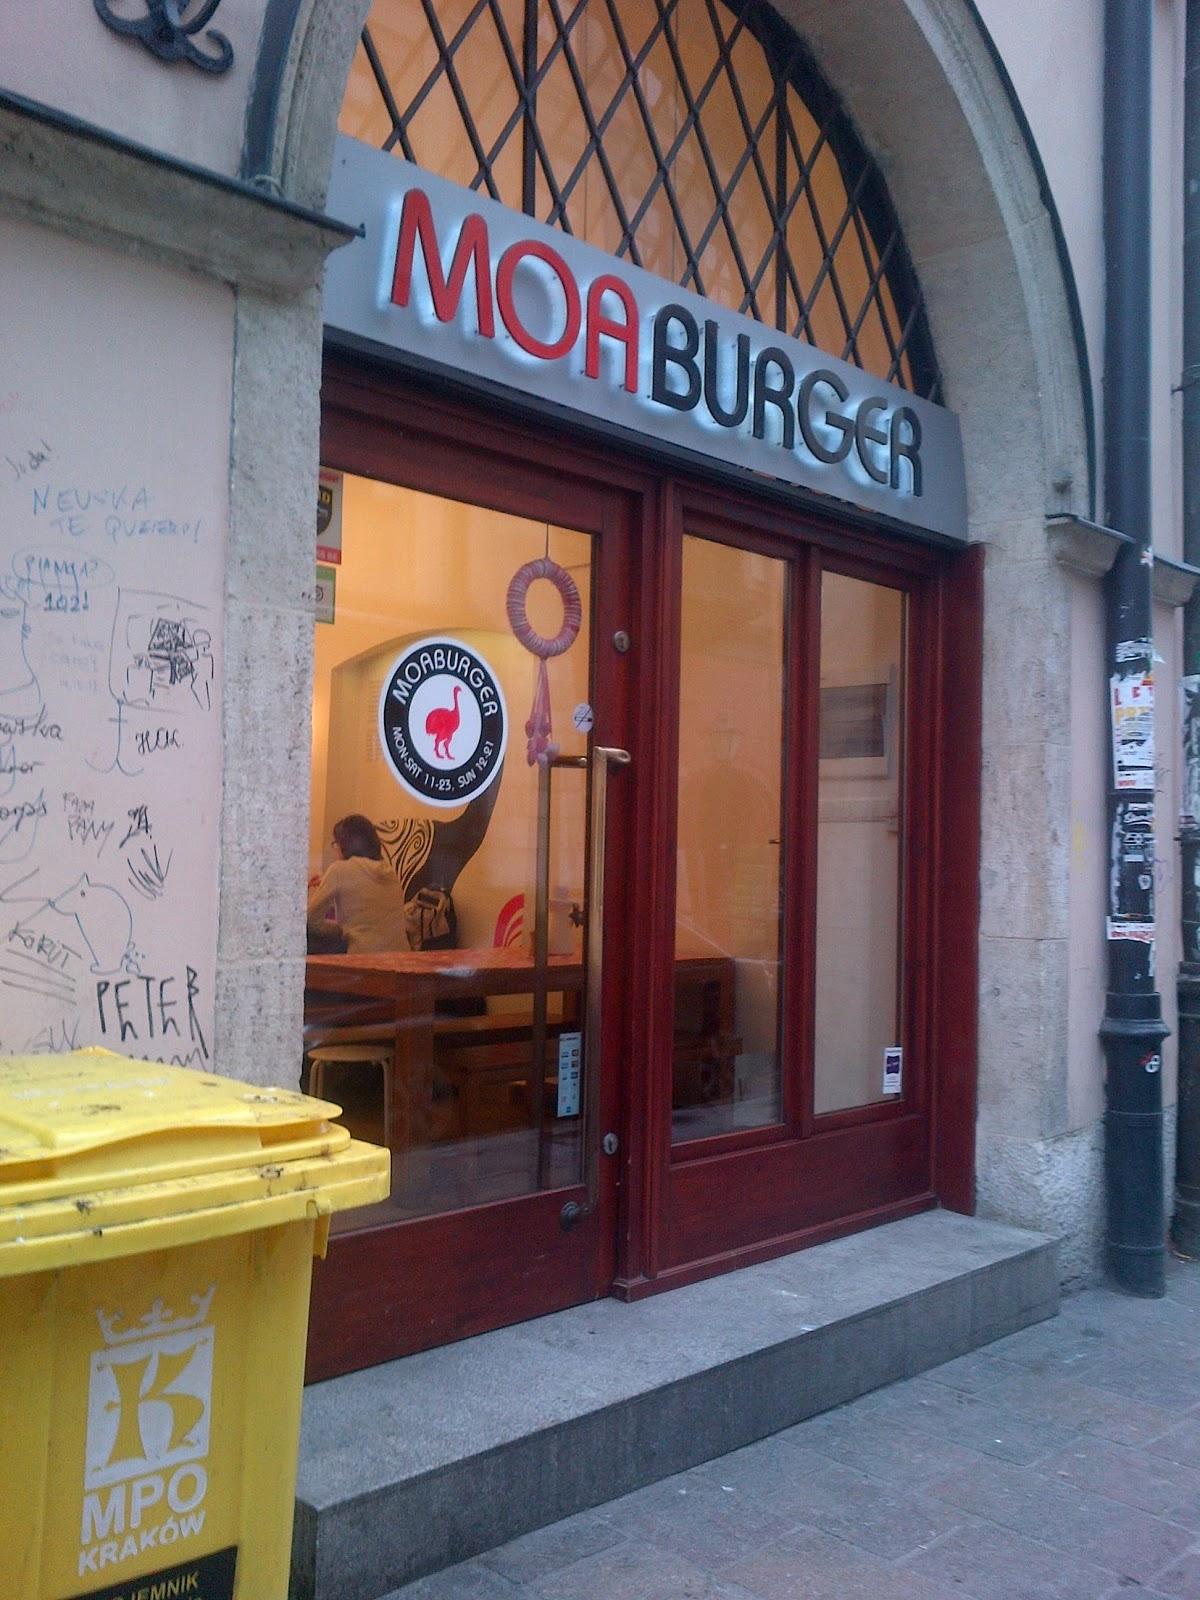 Cover image of this place Moa Burger